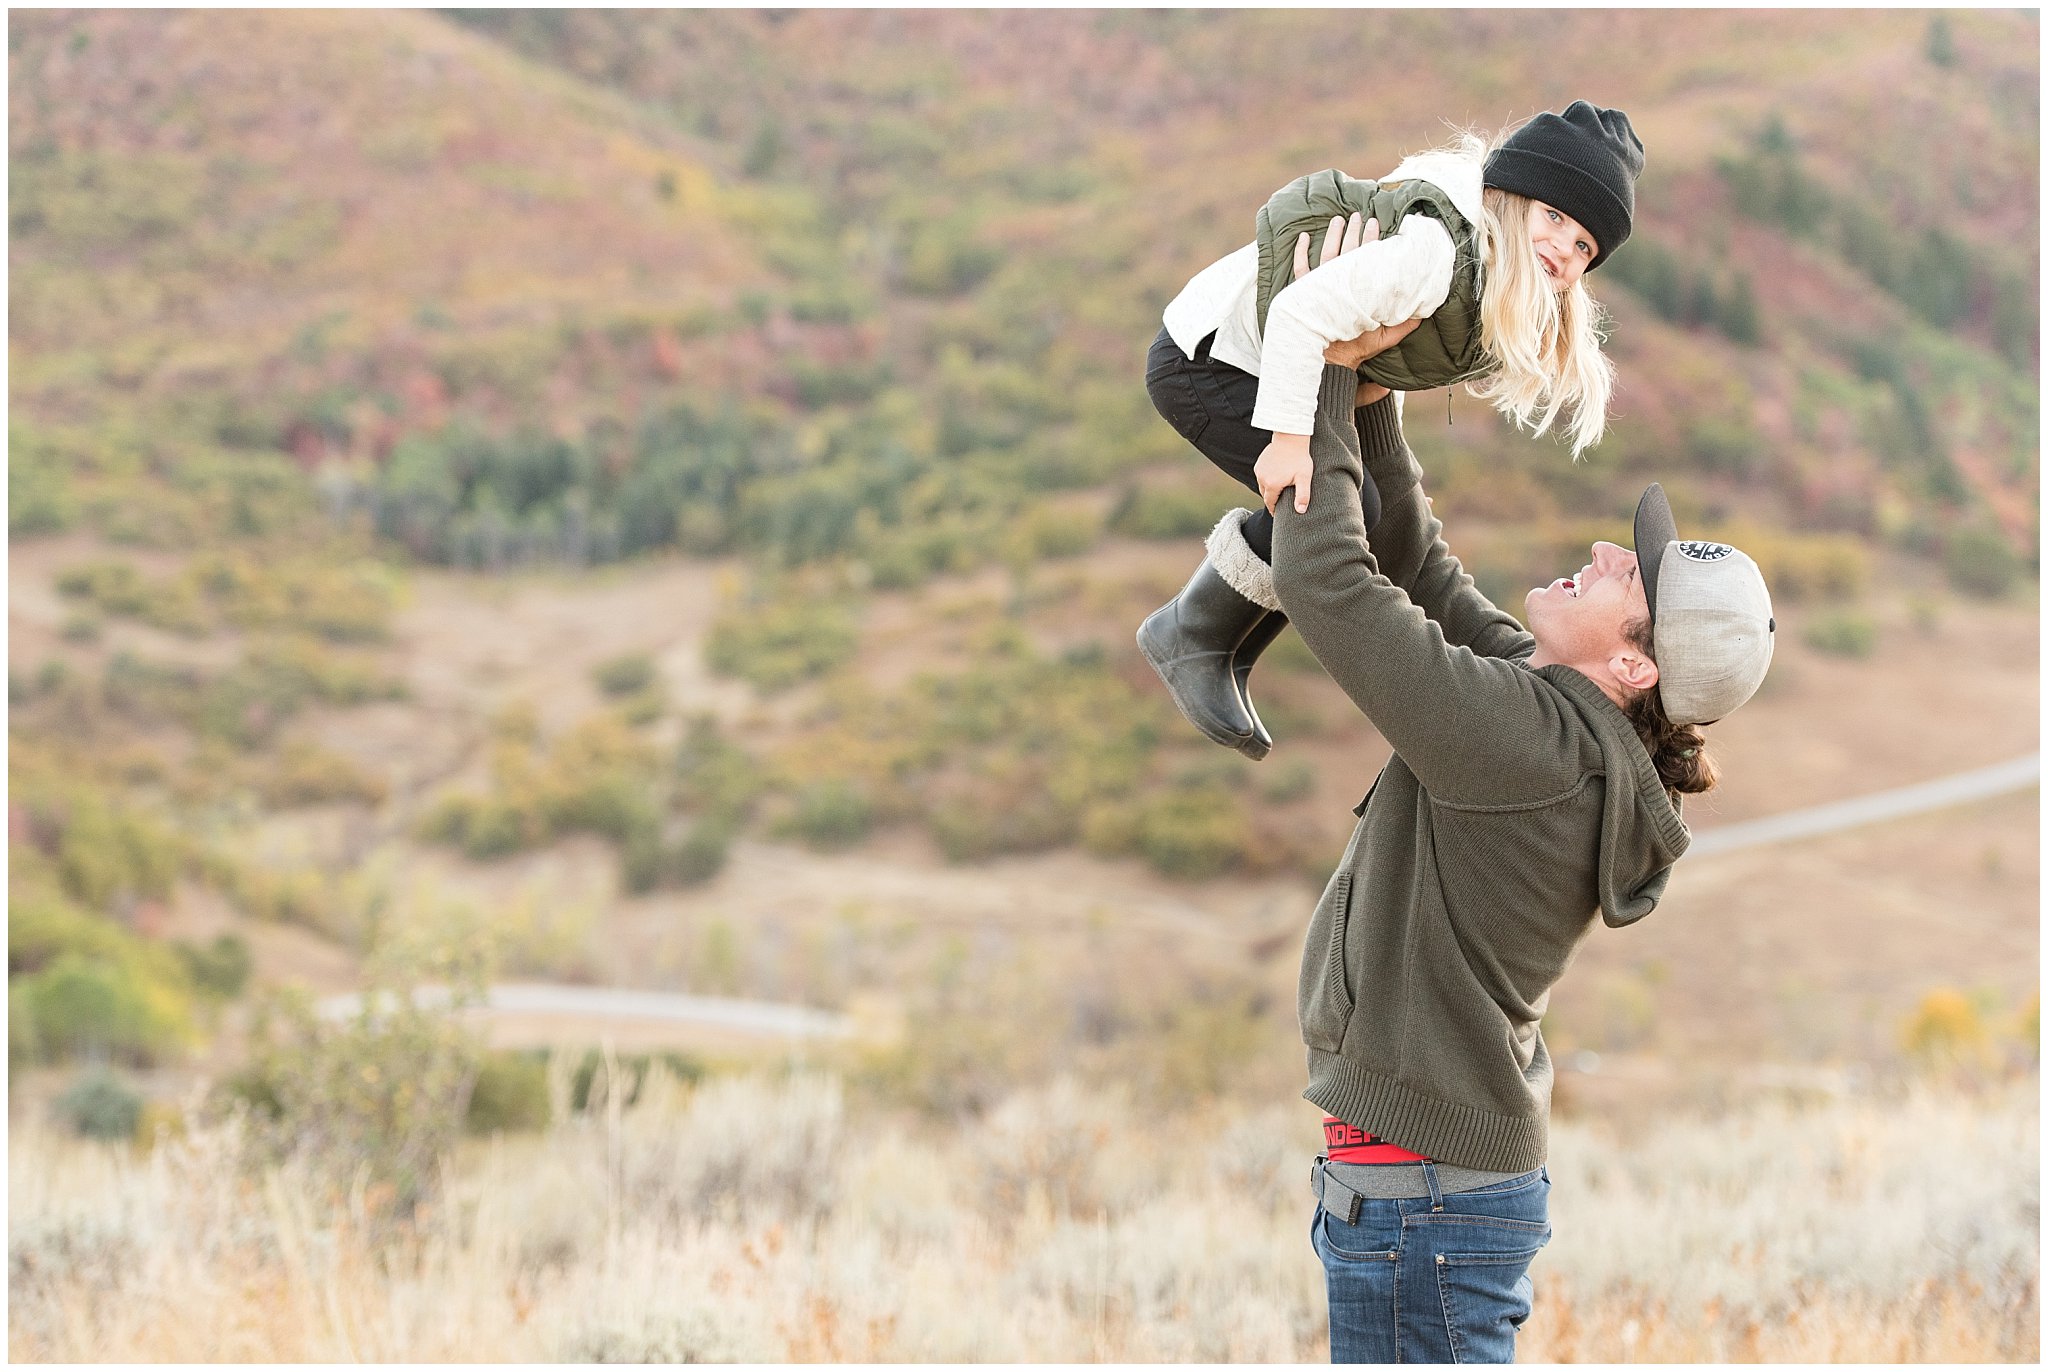 Dad lifts son in the air | Fall Family Pictures in the Mountains | Snowbasin, Utah | Jessie and Dallin